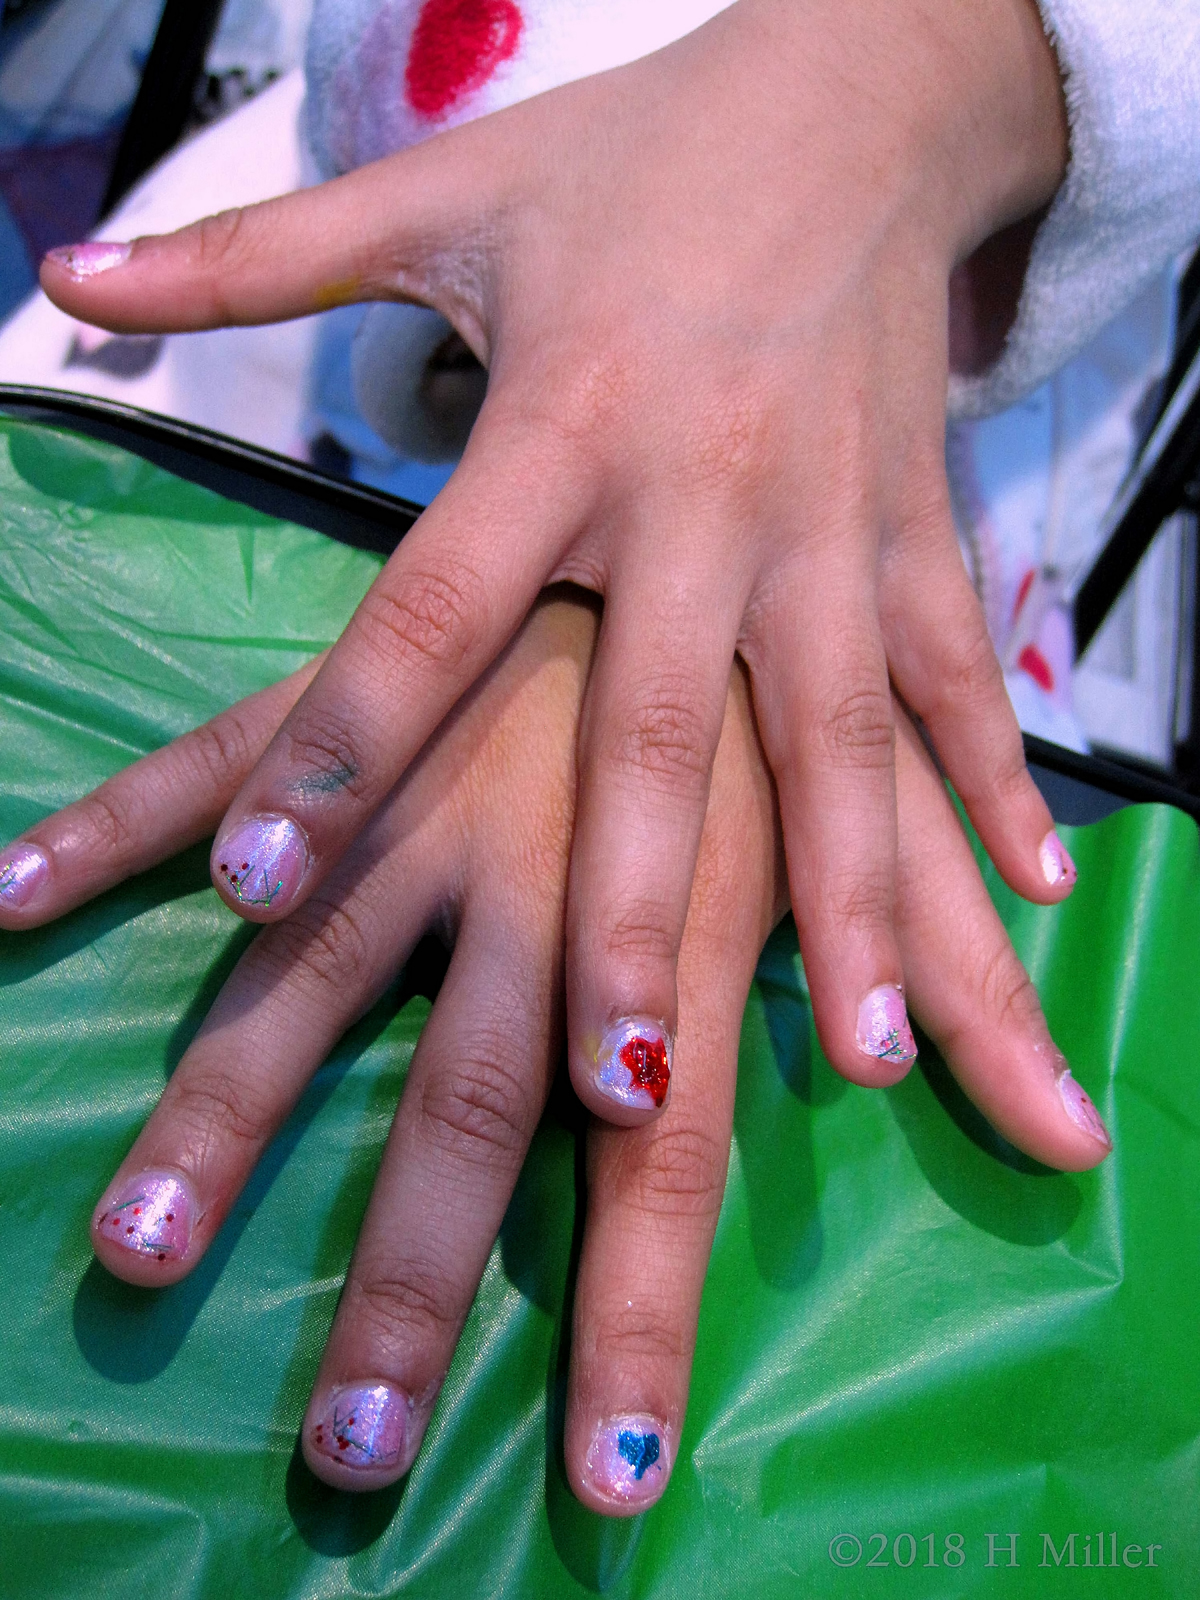 Another Shot Of Beautiful Heart Nail Designs On This Kids Manicure.